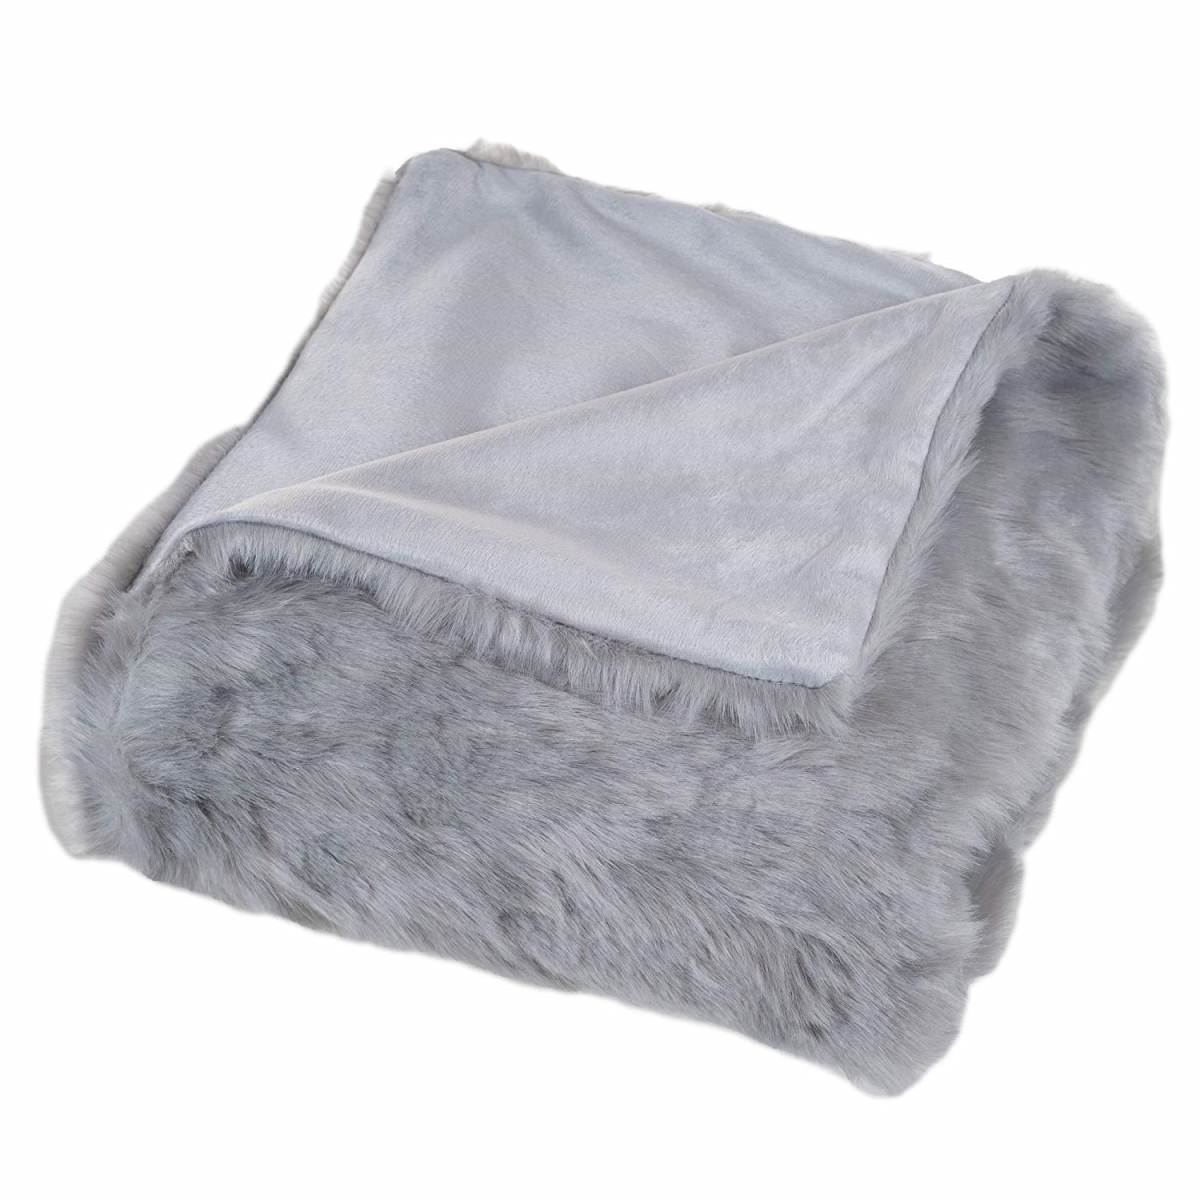 61a-26676 Luxury Long Haired Faux Fur Throw Blanket, Grey